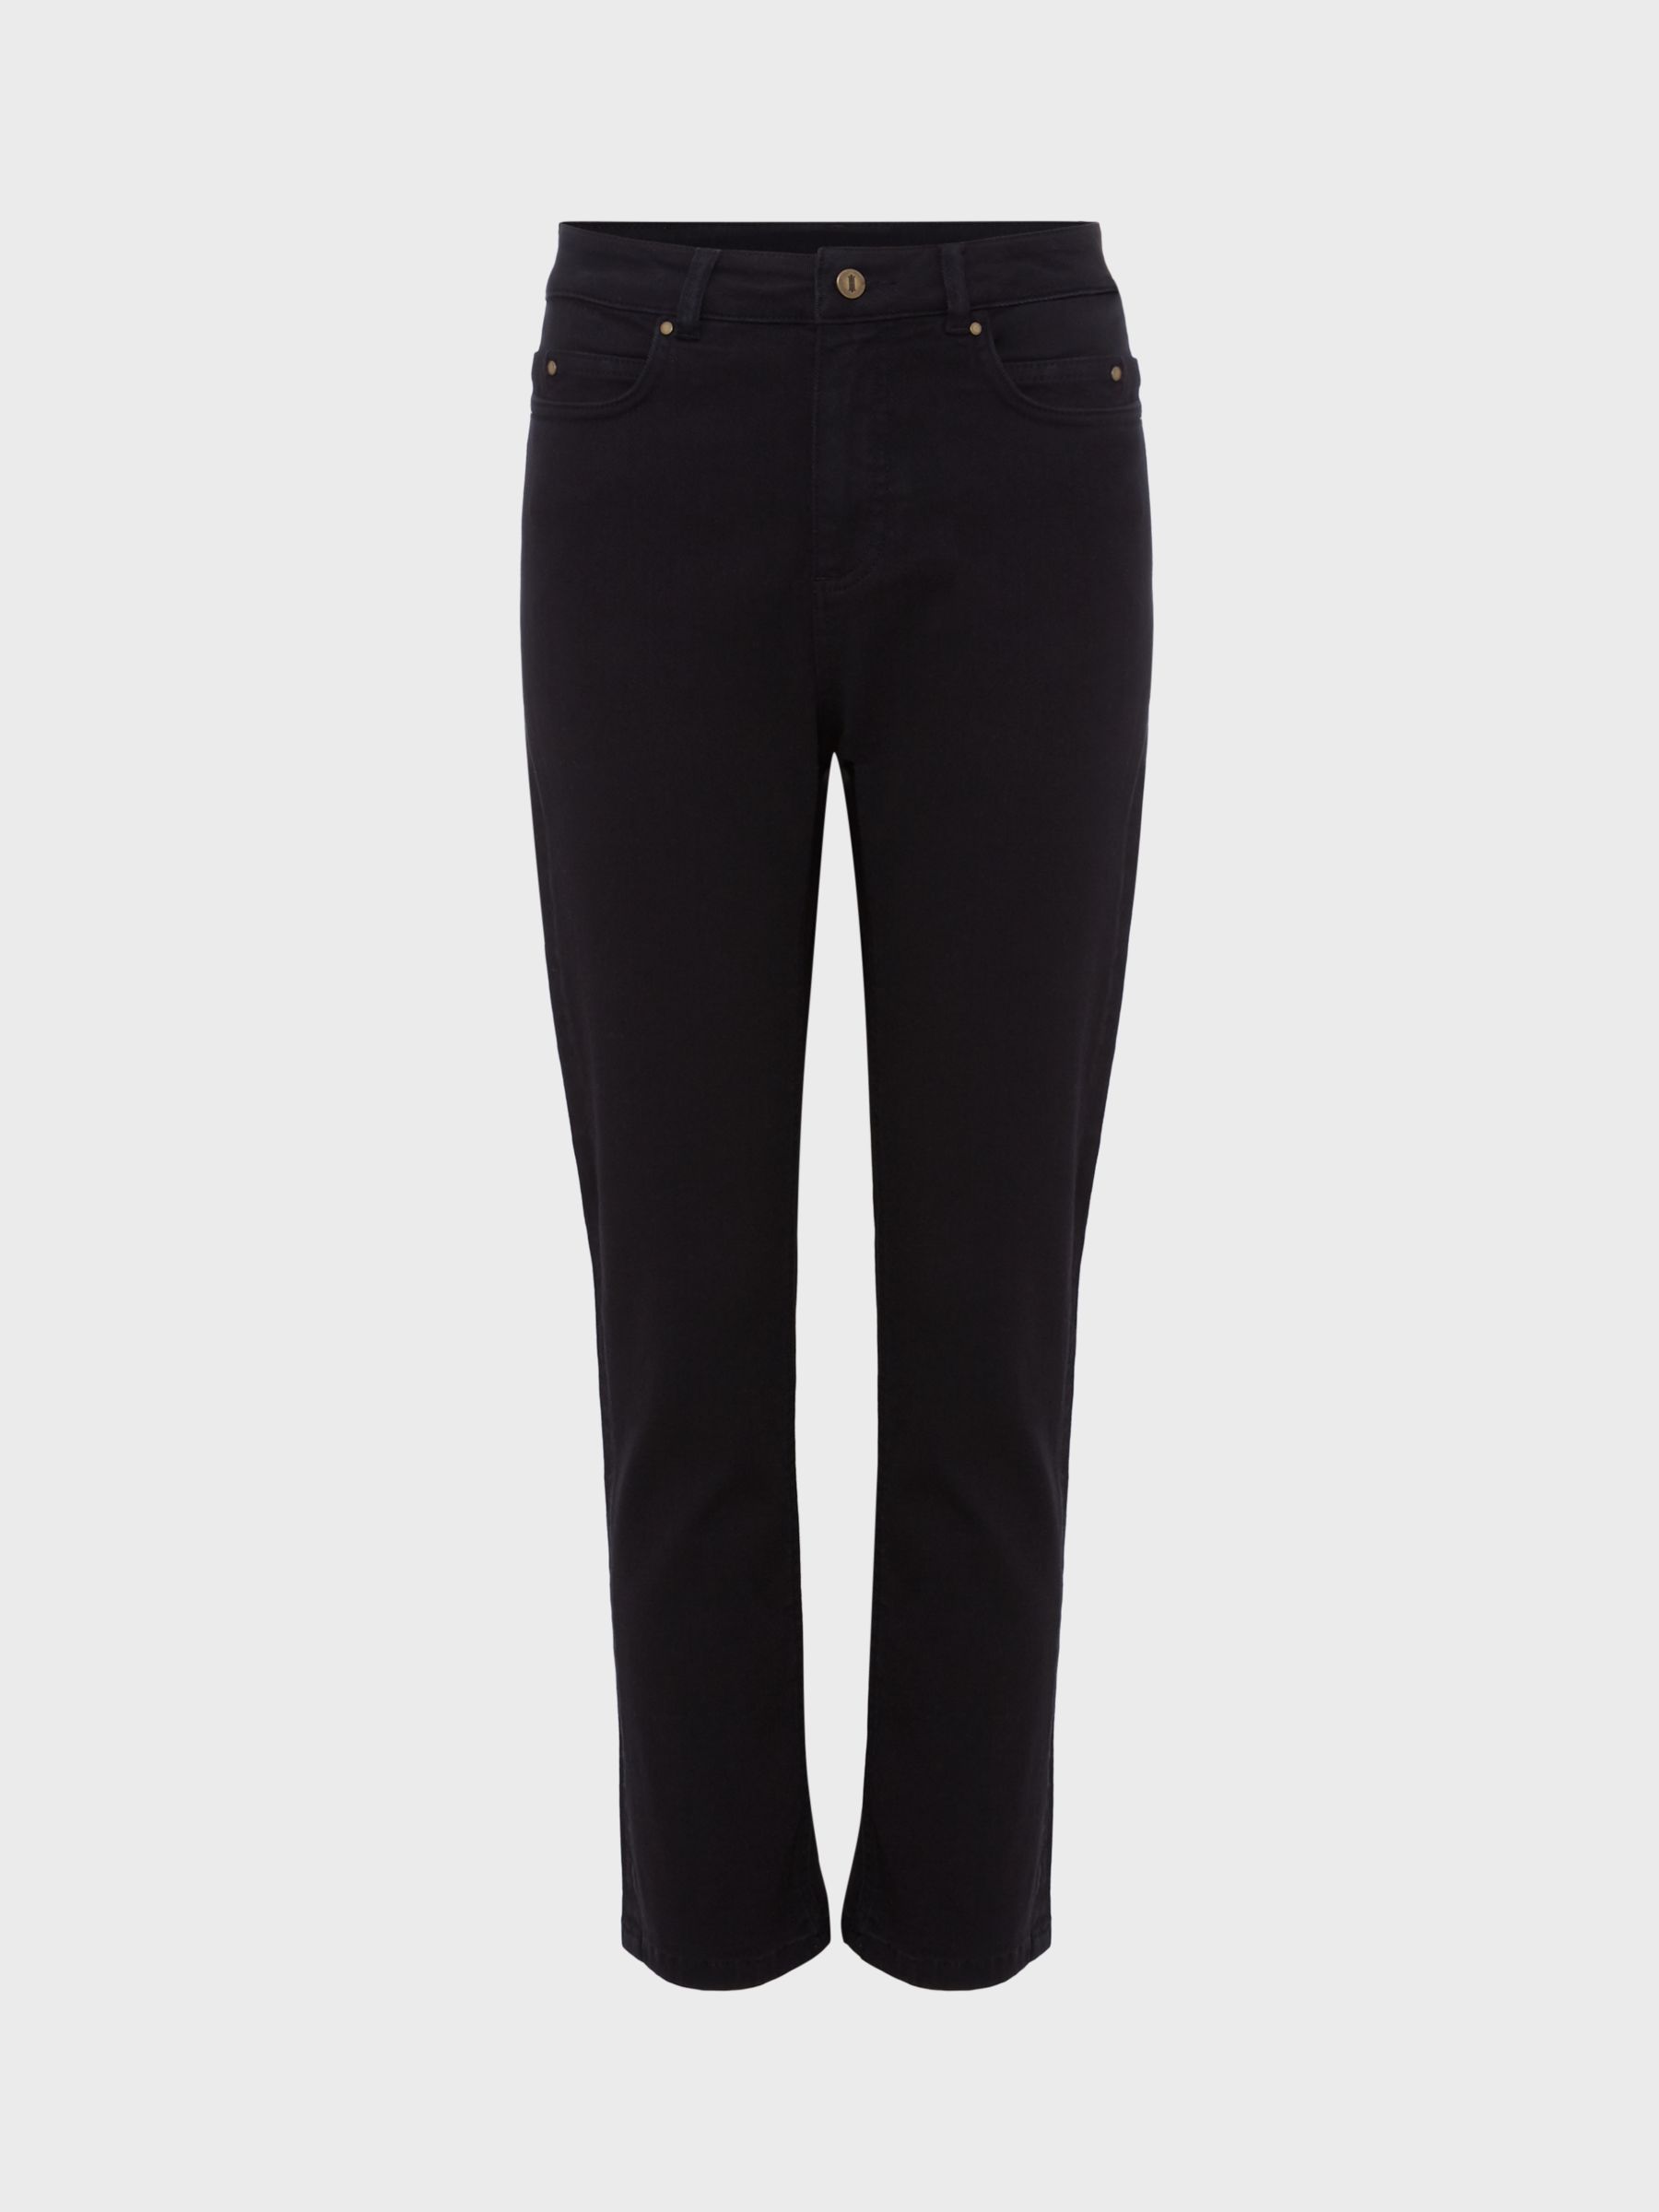 Hobbs Iva Straight Cut Cropped Jeans, Black at John Lewis & Partners